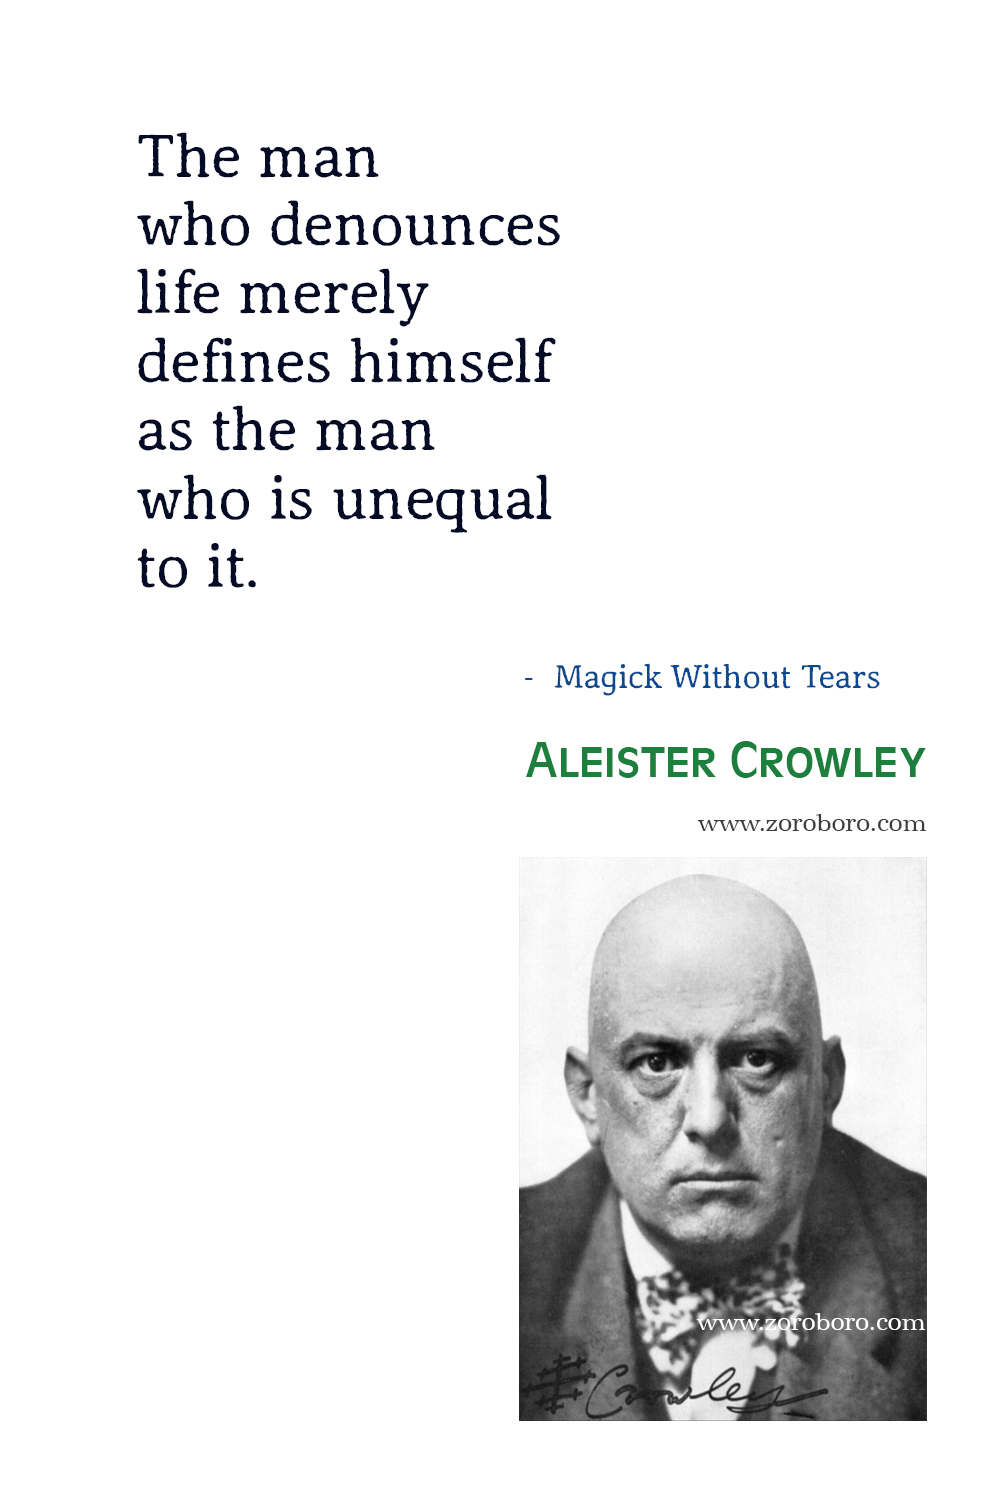 Aleister Crowley Quotes, Aleister Crowley Poet, Aleister Crowley Poetry, Aleister Crowley Poems, Aleister Crowley Books Quotes, Aleister Crowley Writings. Diary of a Drug Fiend, The Book of the Law, The Book of Lies & Moonchild (novel).